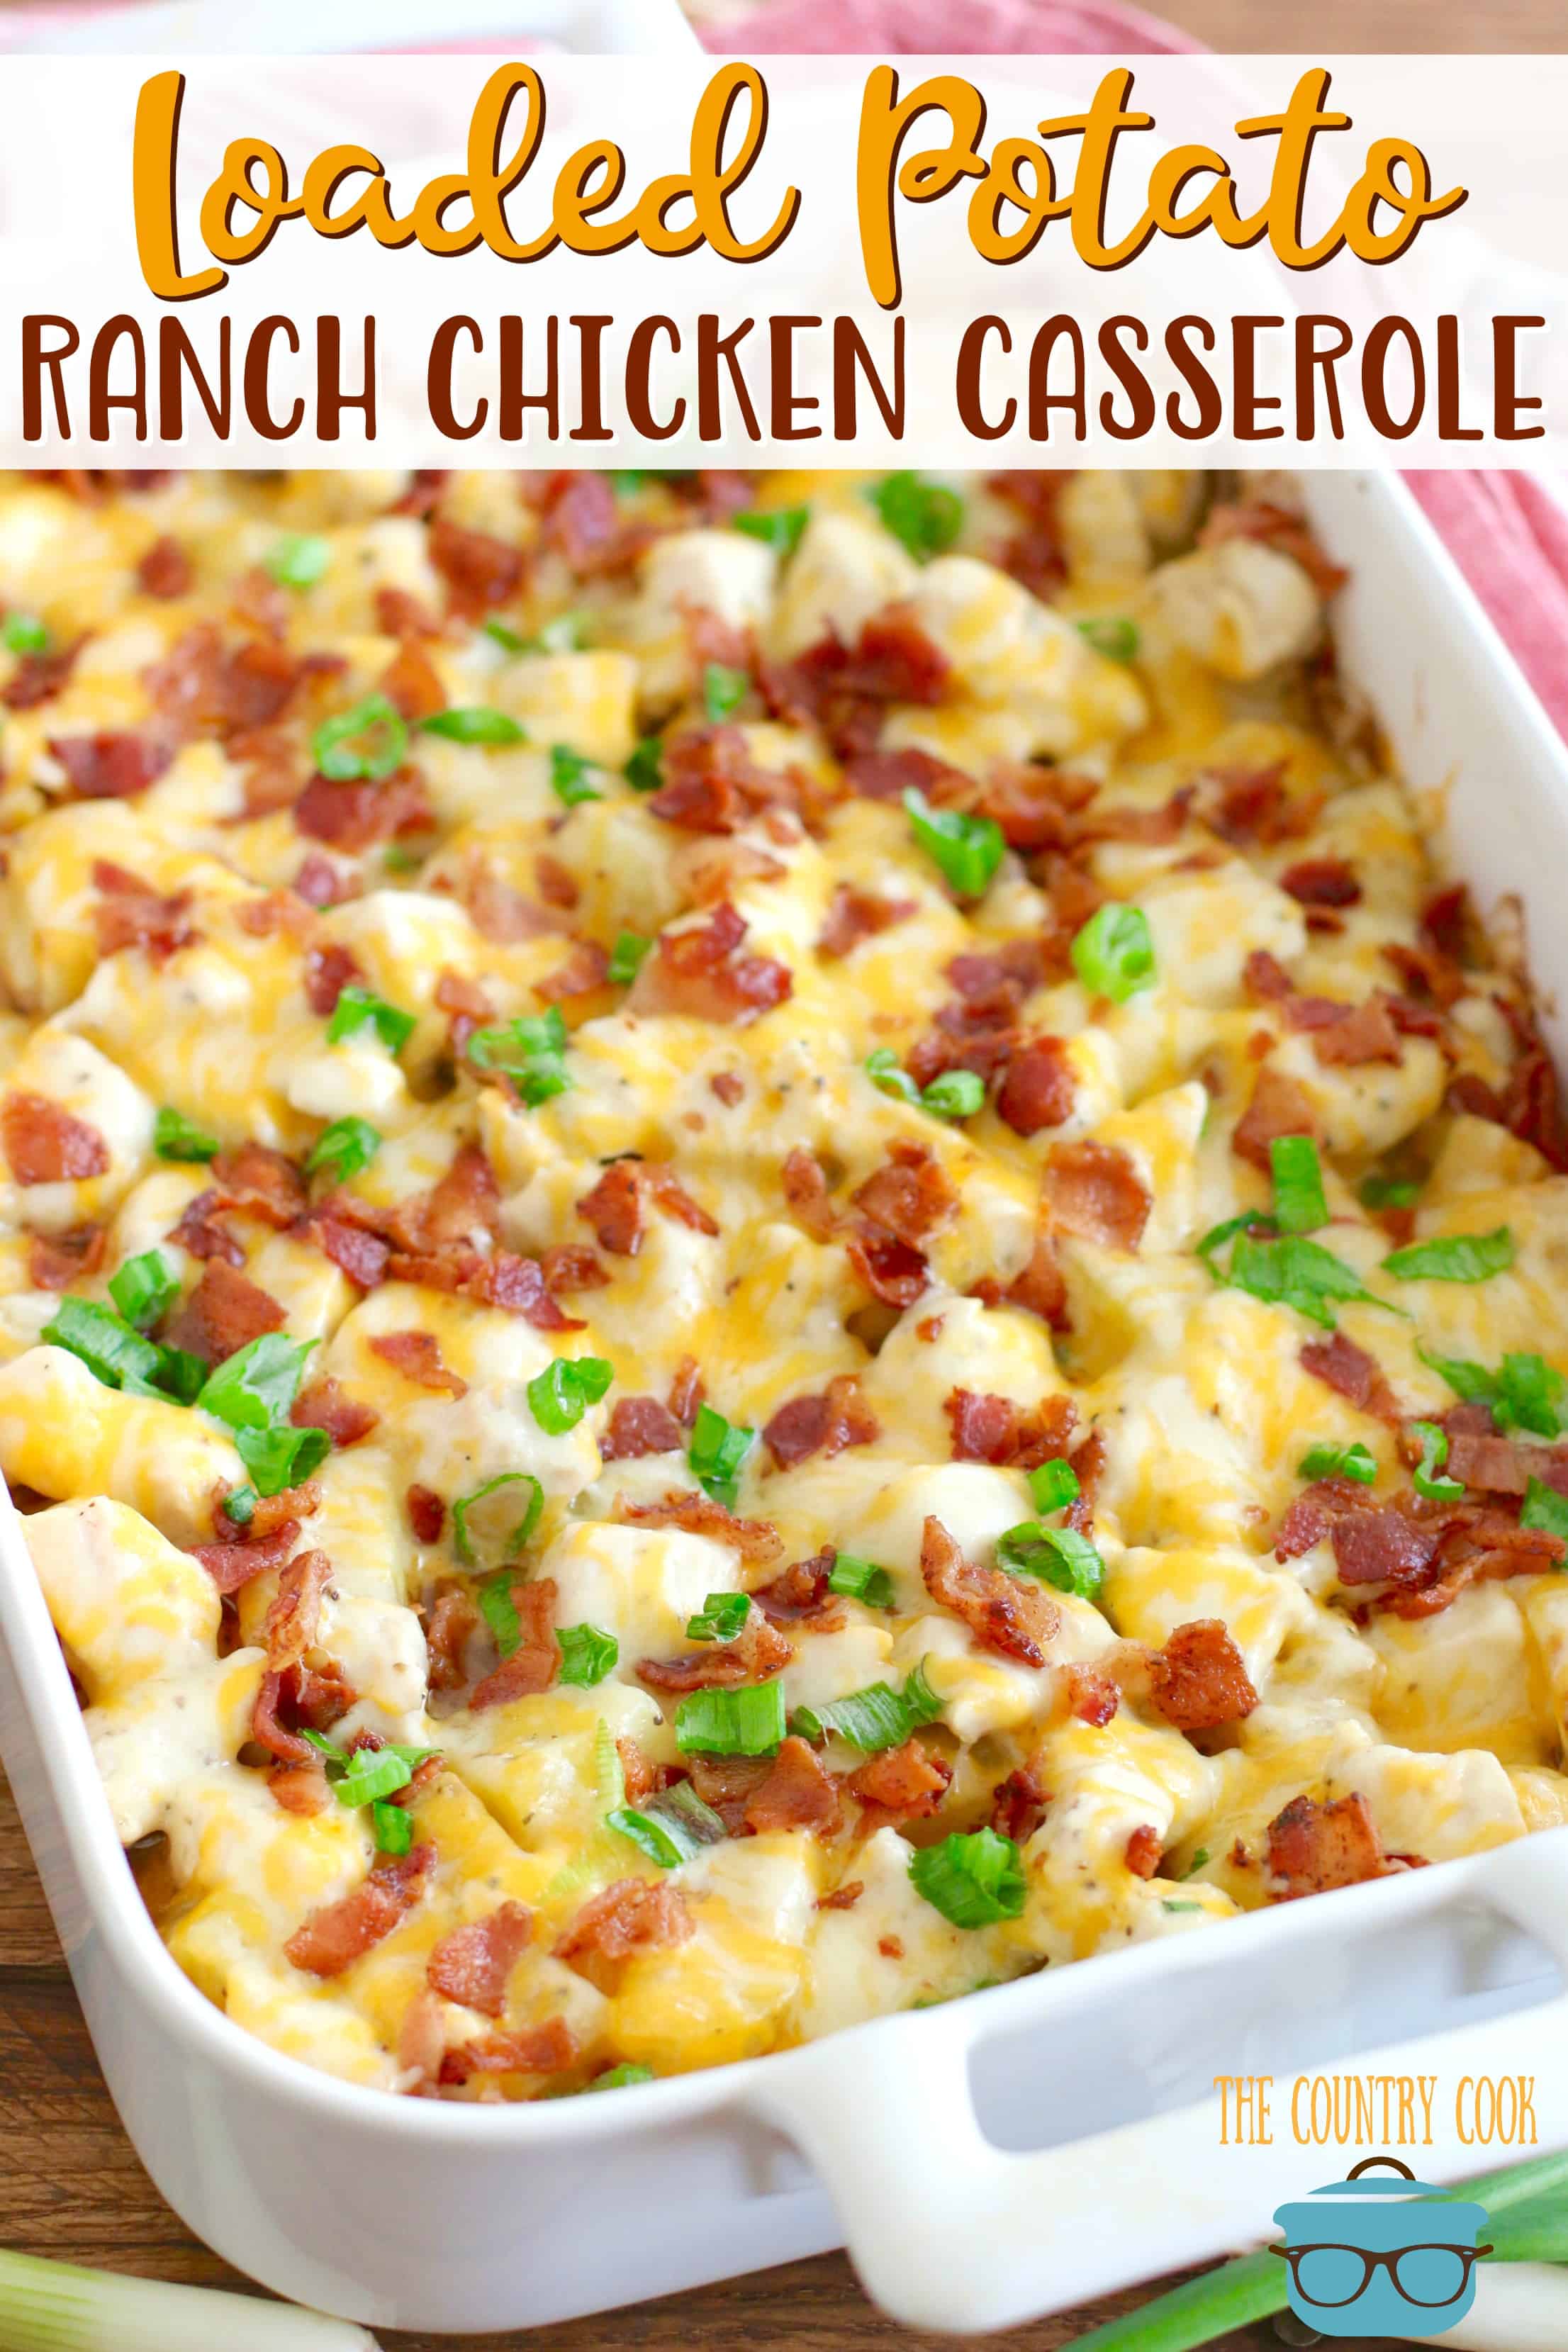 Loaded Potato Ranch Chicken Casserole recipe from The Country Cook. Cheese, potatoes and chicken in a white baking dish topped with melted cheese, sliced cooked bacon and sliced green onions.